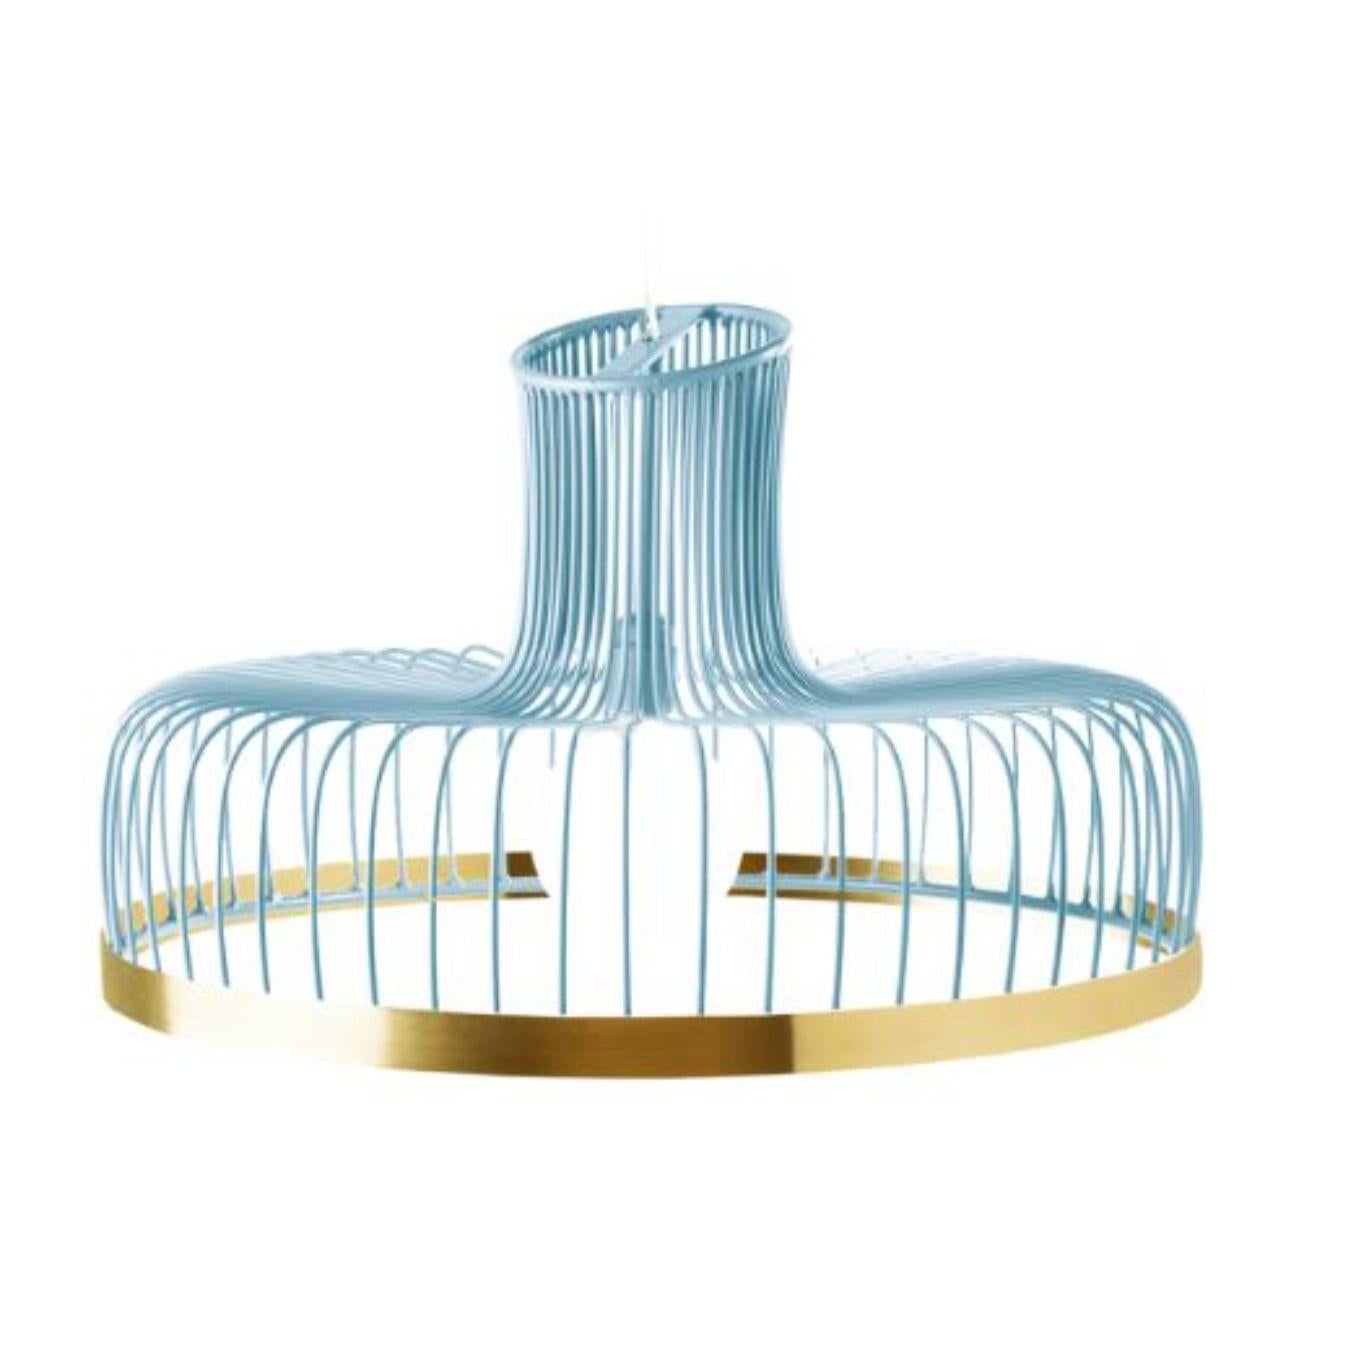 Metal Moss New Spider Suspension Lamp with Copper Ring by Dooq For Sale